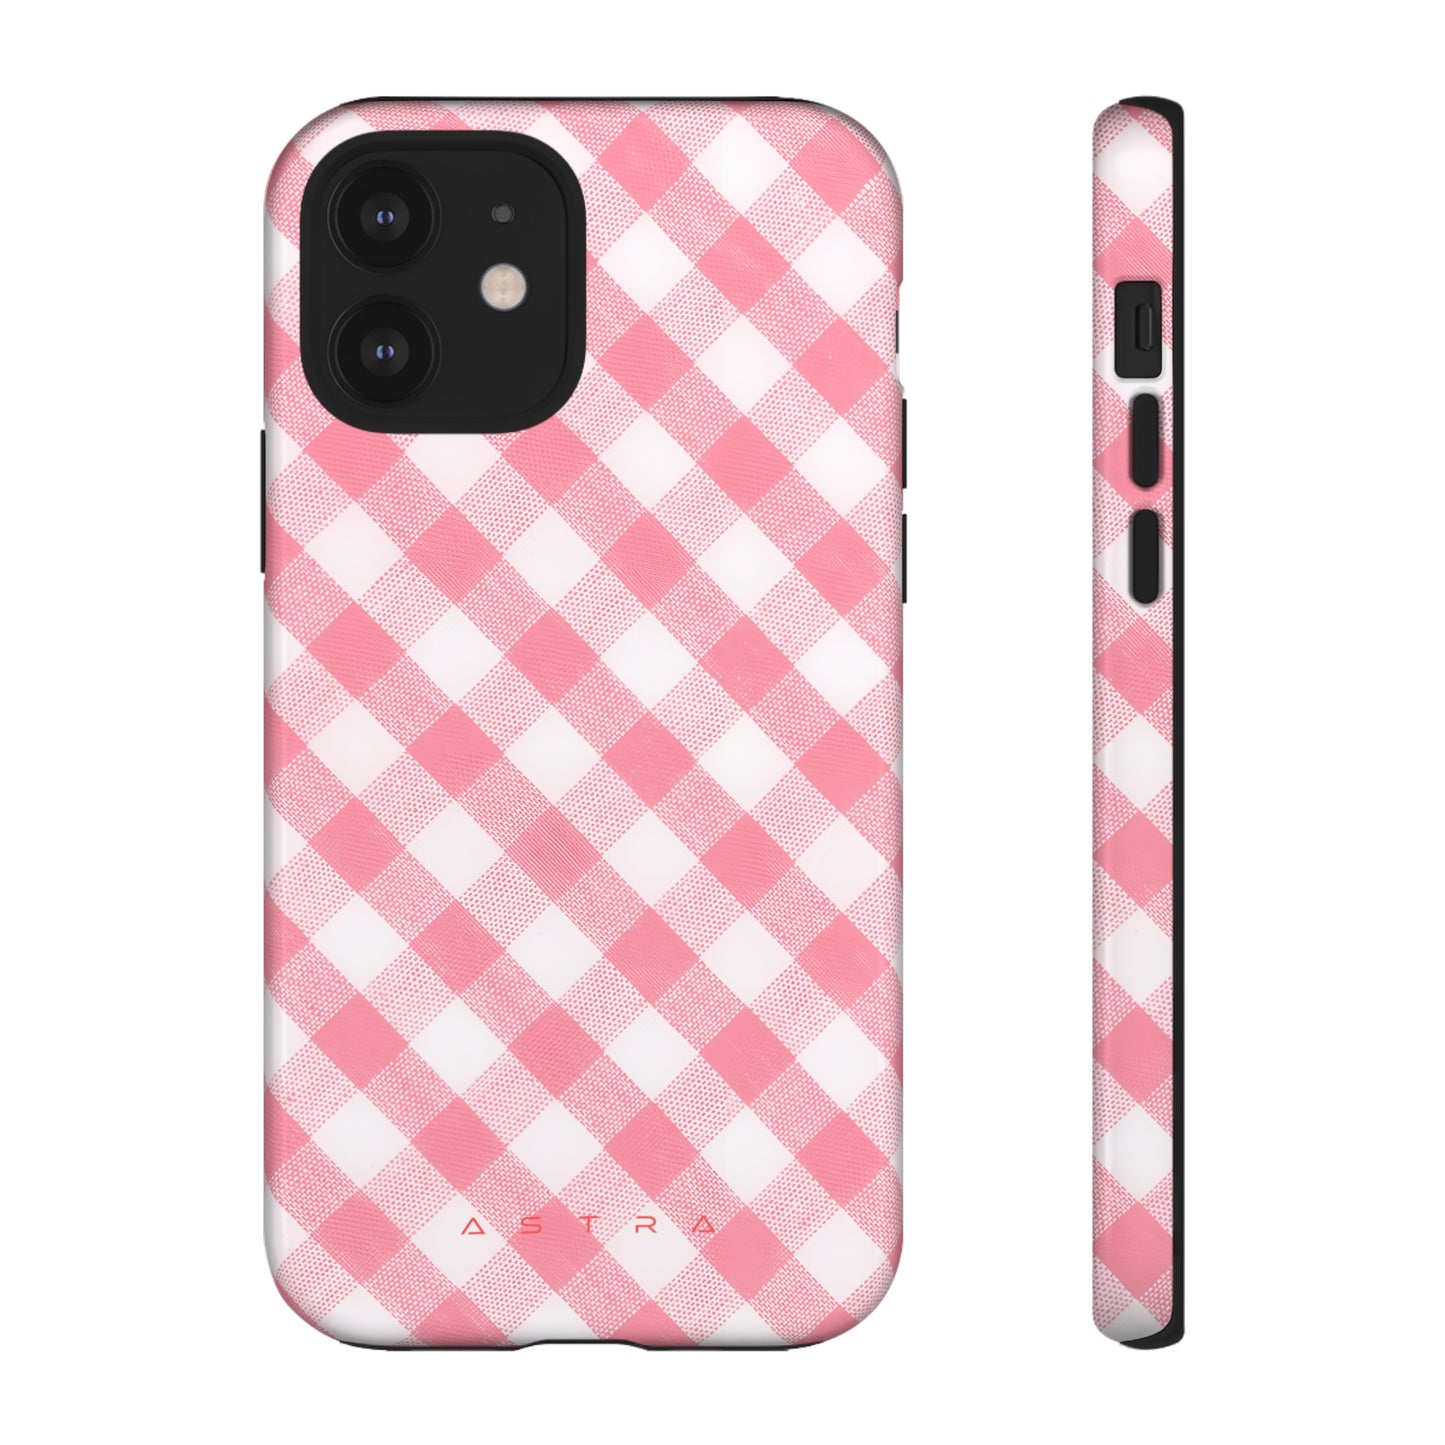 Garden Party iPhone 12 Glossy Phone Case Accessories Elite Glossy iPhone Cases Matte Phone accessory Phone Cases Samsung Cases Valentine's Day Picks